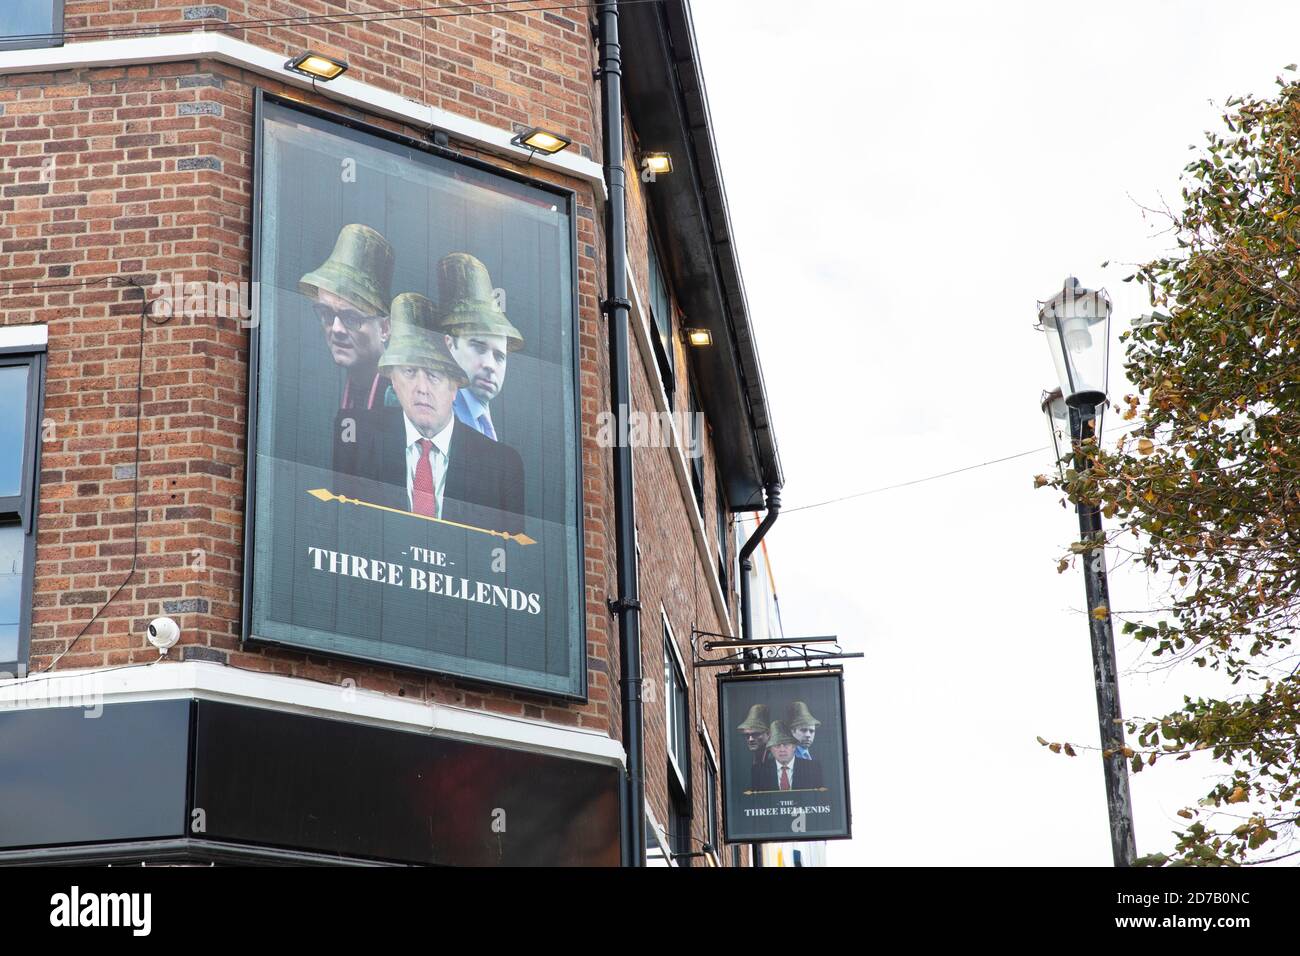 LIVERPOOL, UK - October 2020: The James Atherton Pub in Merseyside is re-named The Three Bellends in protest against the UK Government Stock Photo